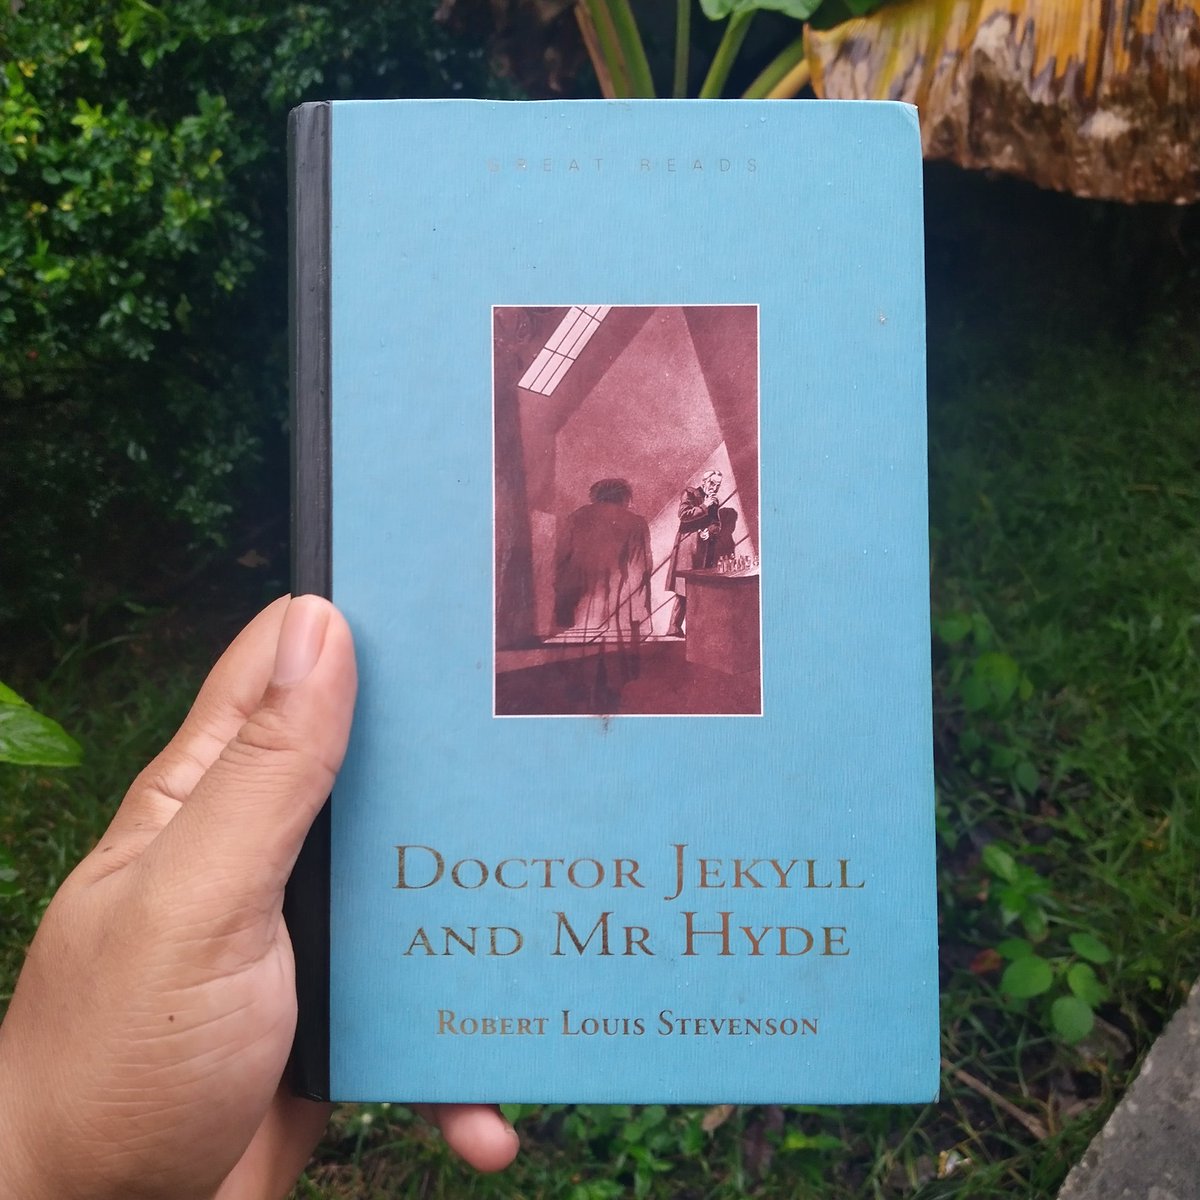 Have you tried #reading? It's a great source of entertainment when there aren't any movies, TV shows, or games at the moment.

— #books #book #livres #livre #libros #libro #DoctorJekyllAndMrHyde #BritishLiterature #EnglishLiterature #كتب #كتاب #本